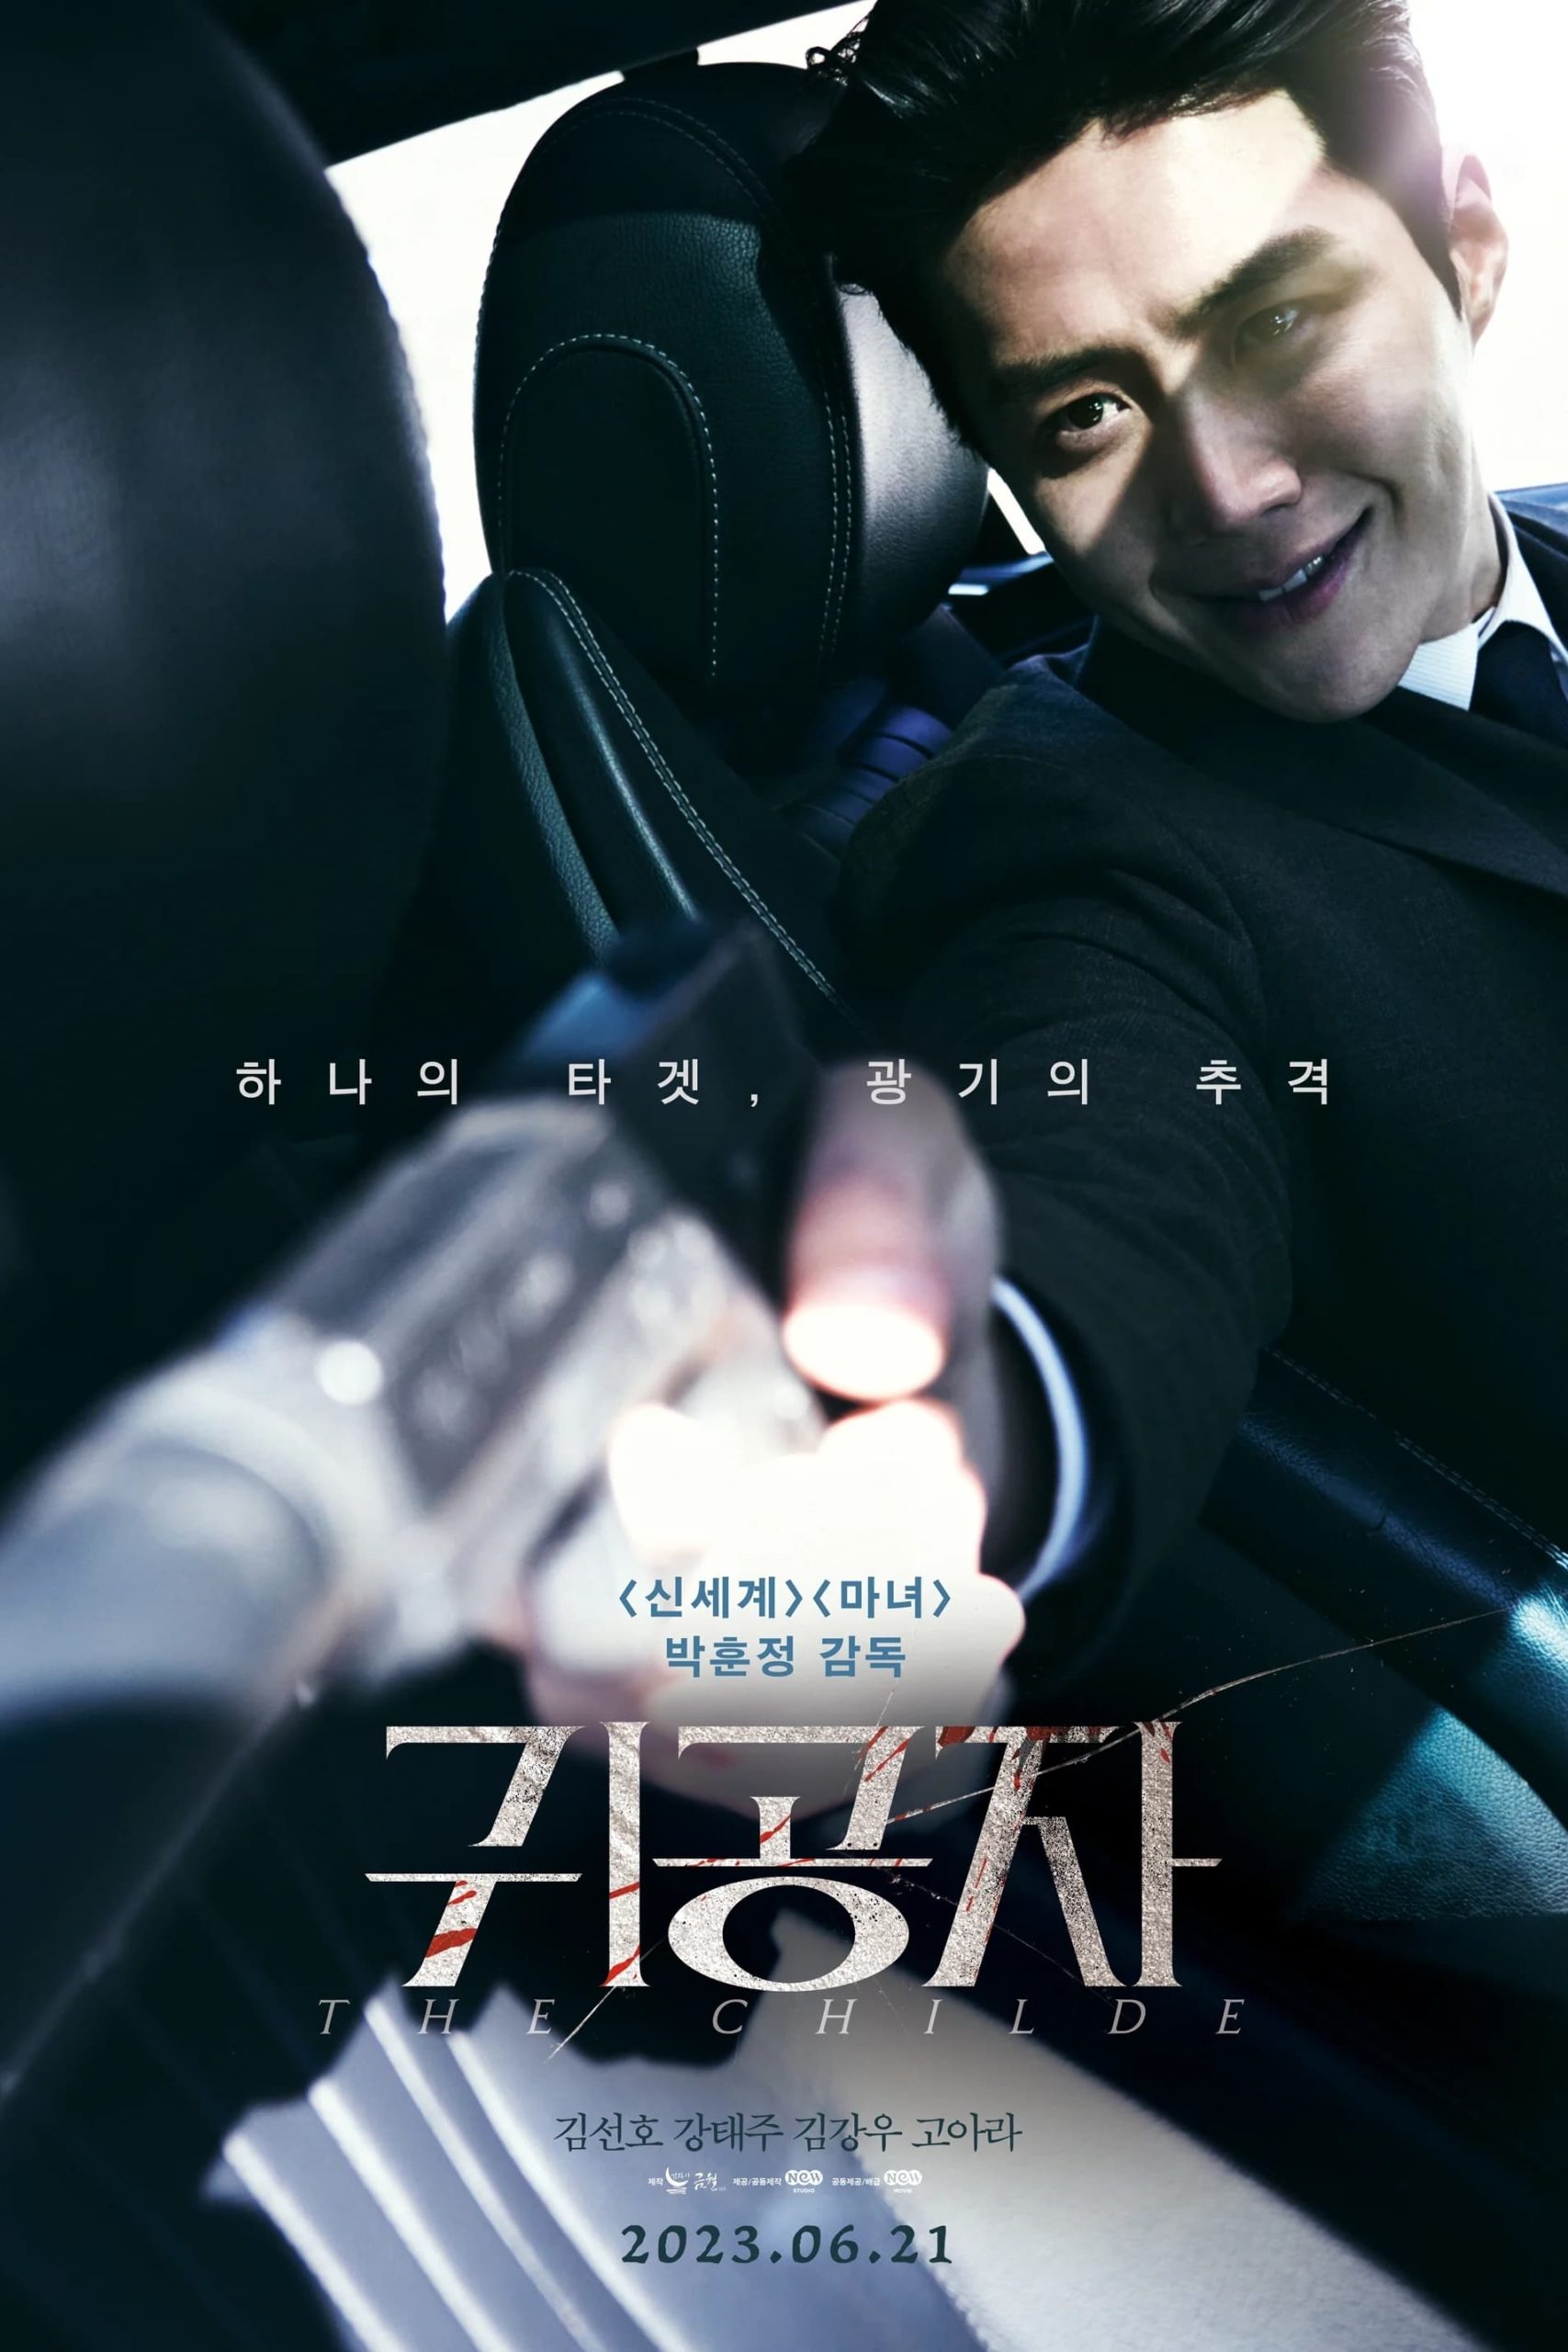 Poster for the movie "귀공자"